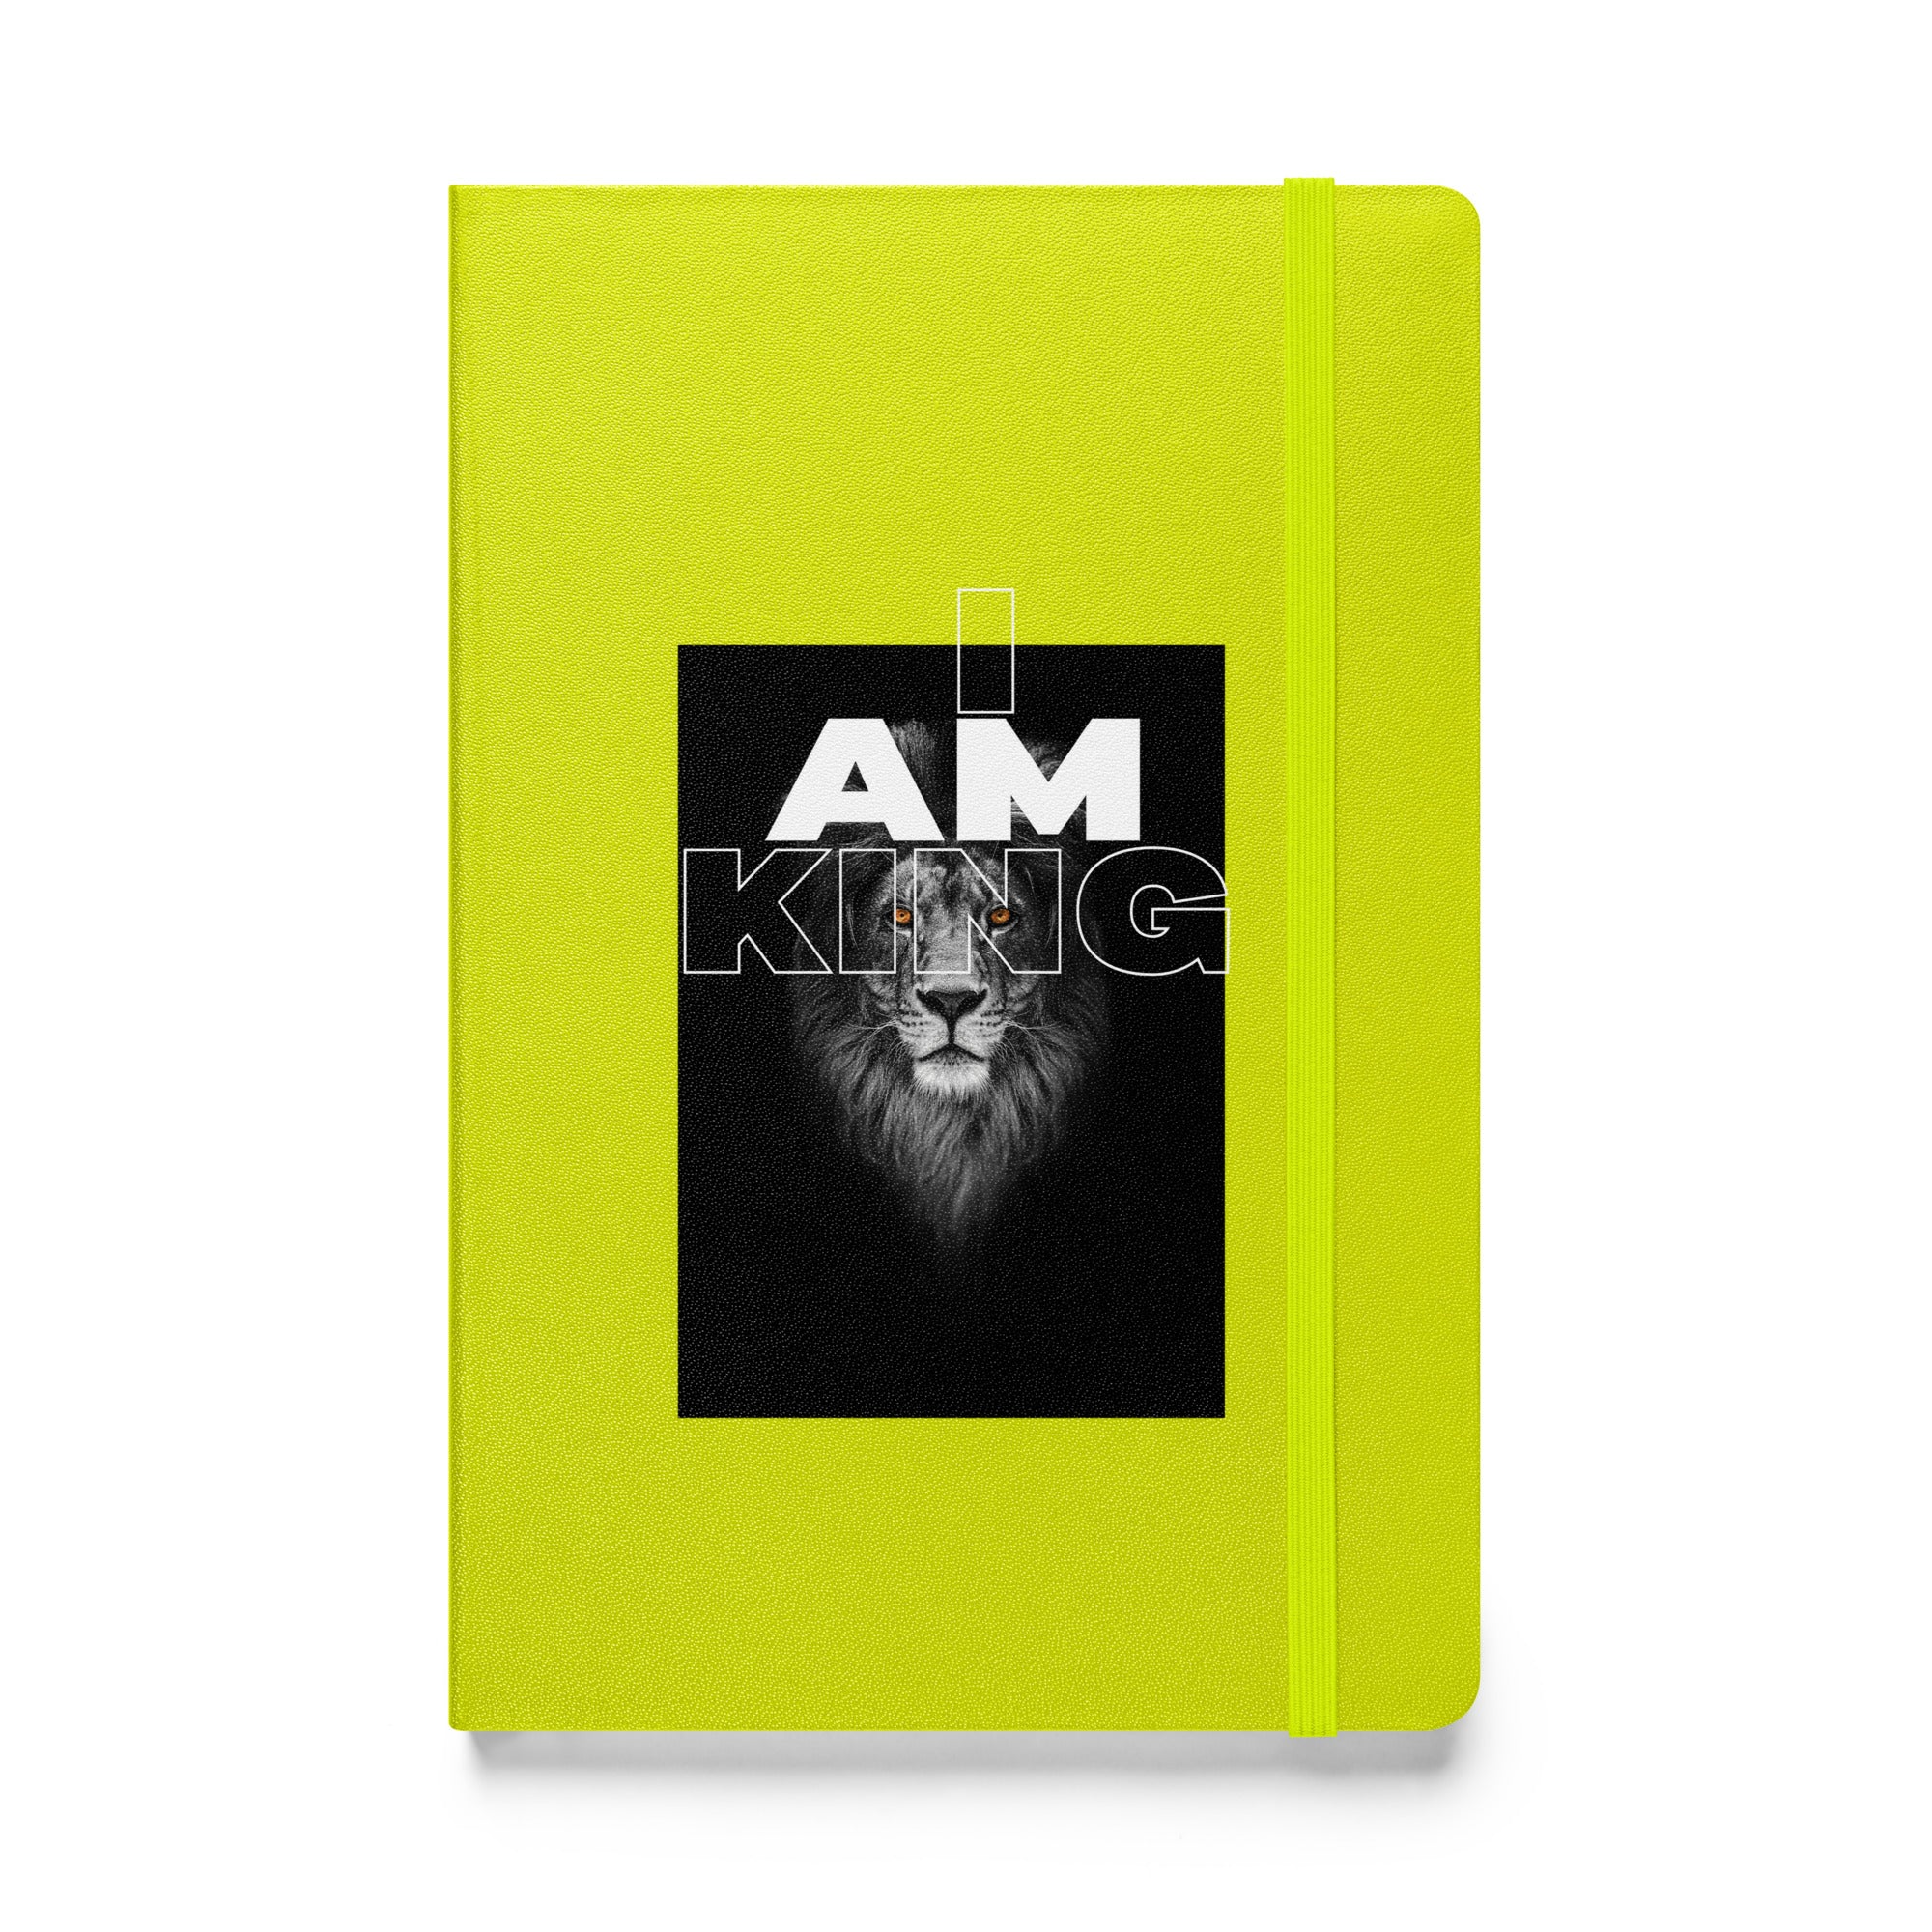 I AM King Hardcover bound notebook